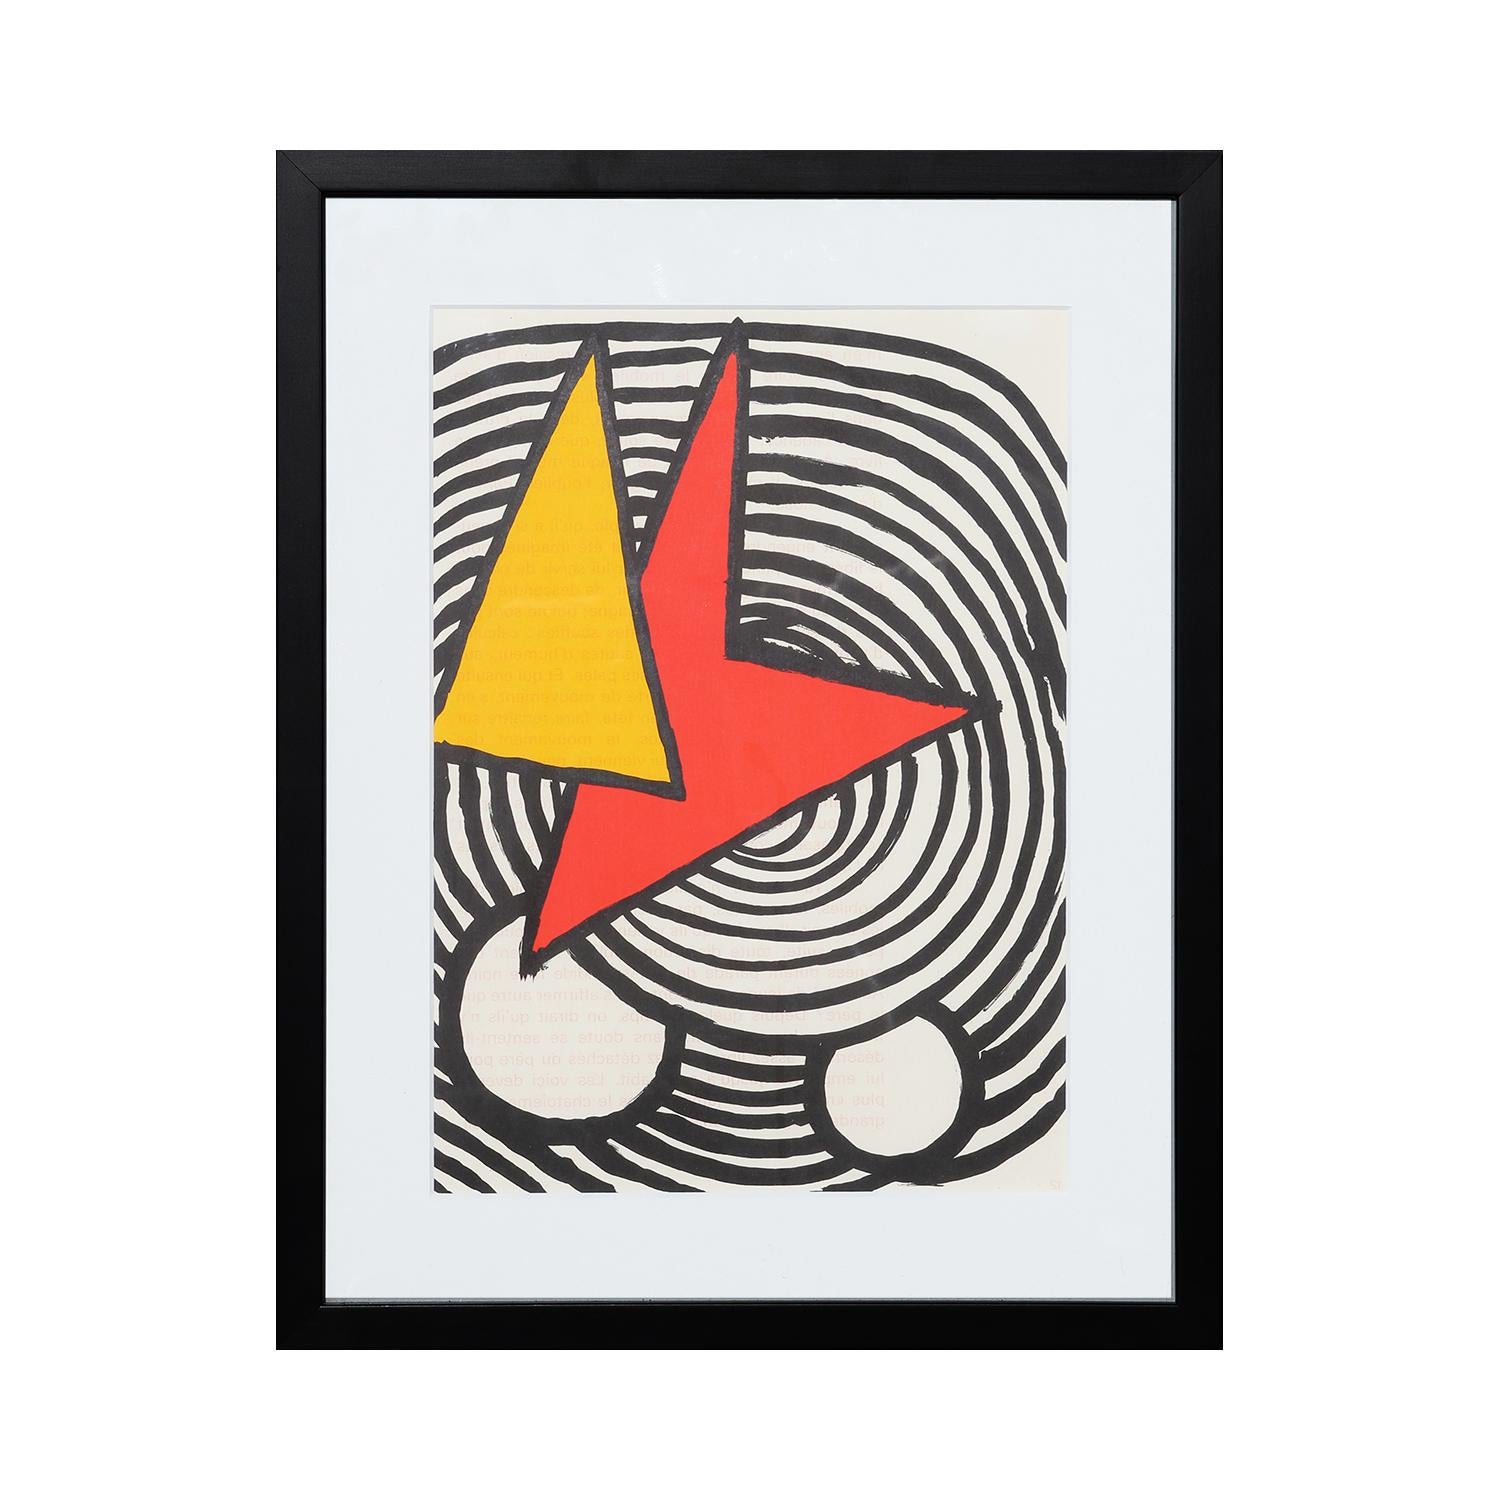 Modern Black, White, Red, and Yellow Derrière le Miroir Abstract Lithograph - Print by Alexander Calder